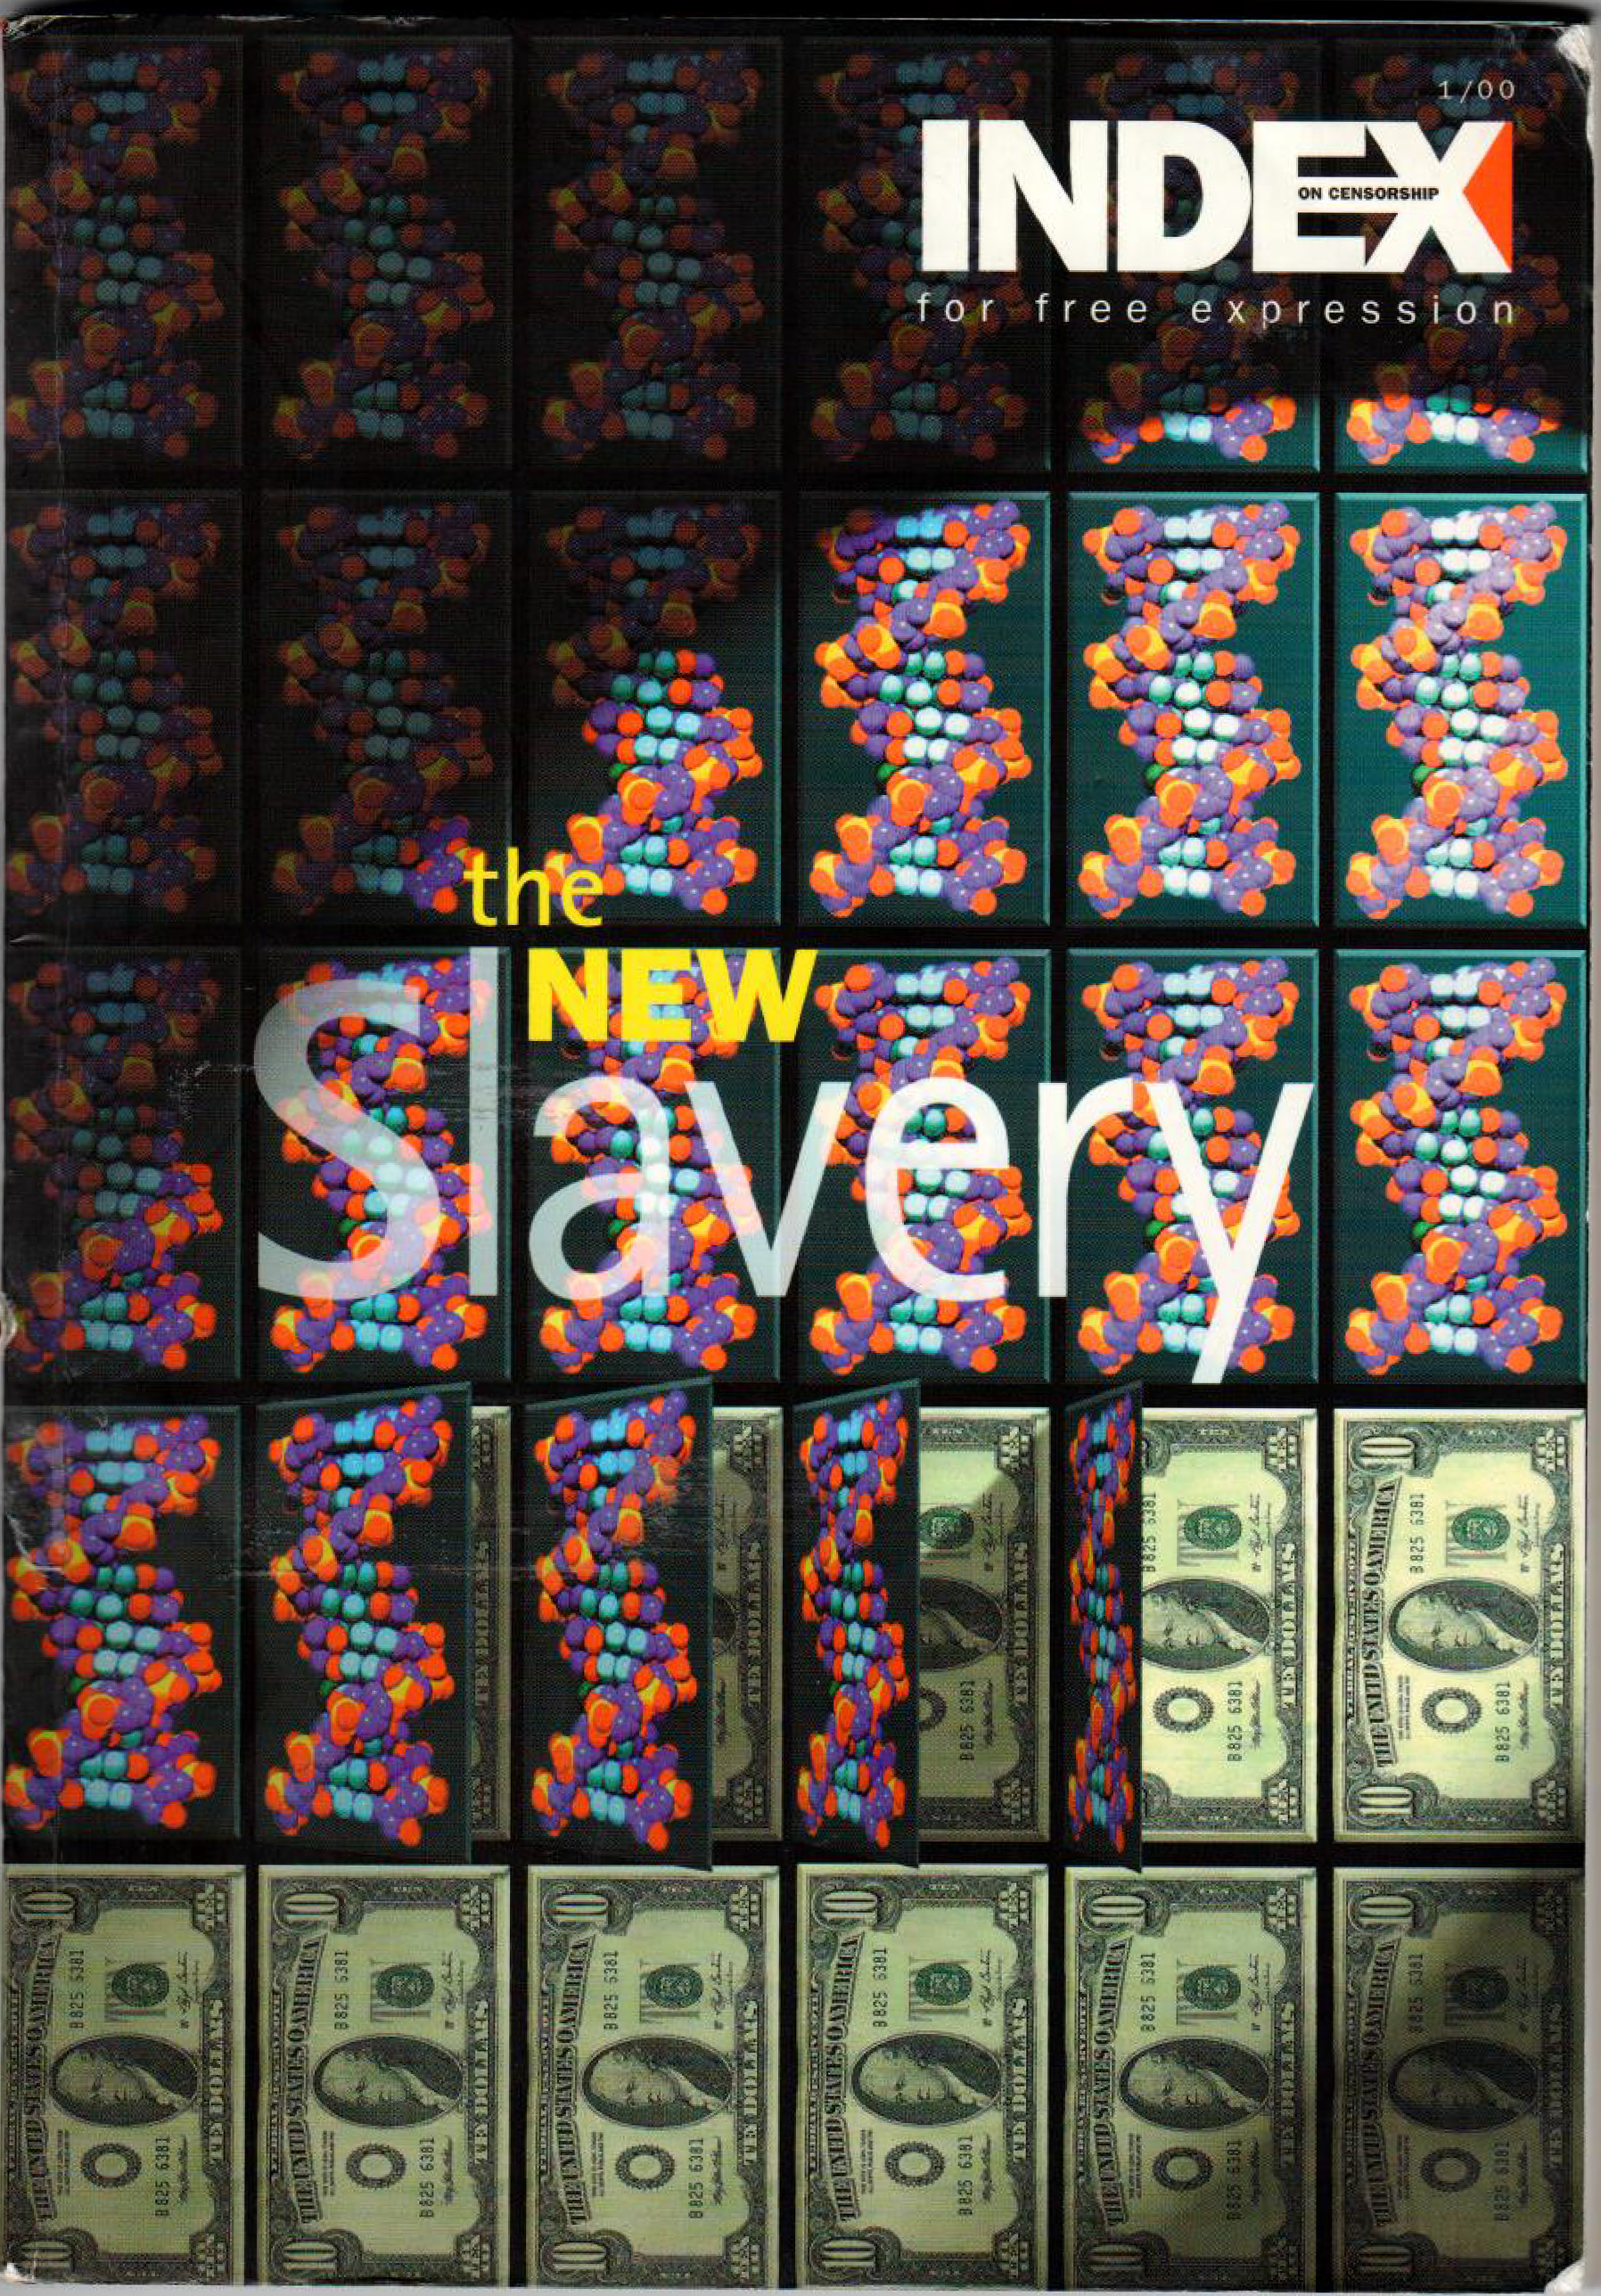 The new slavery, the January 2000 issue of Index on Censorship magazine.